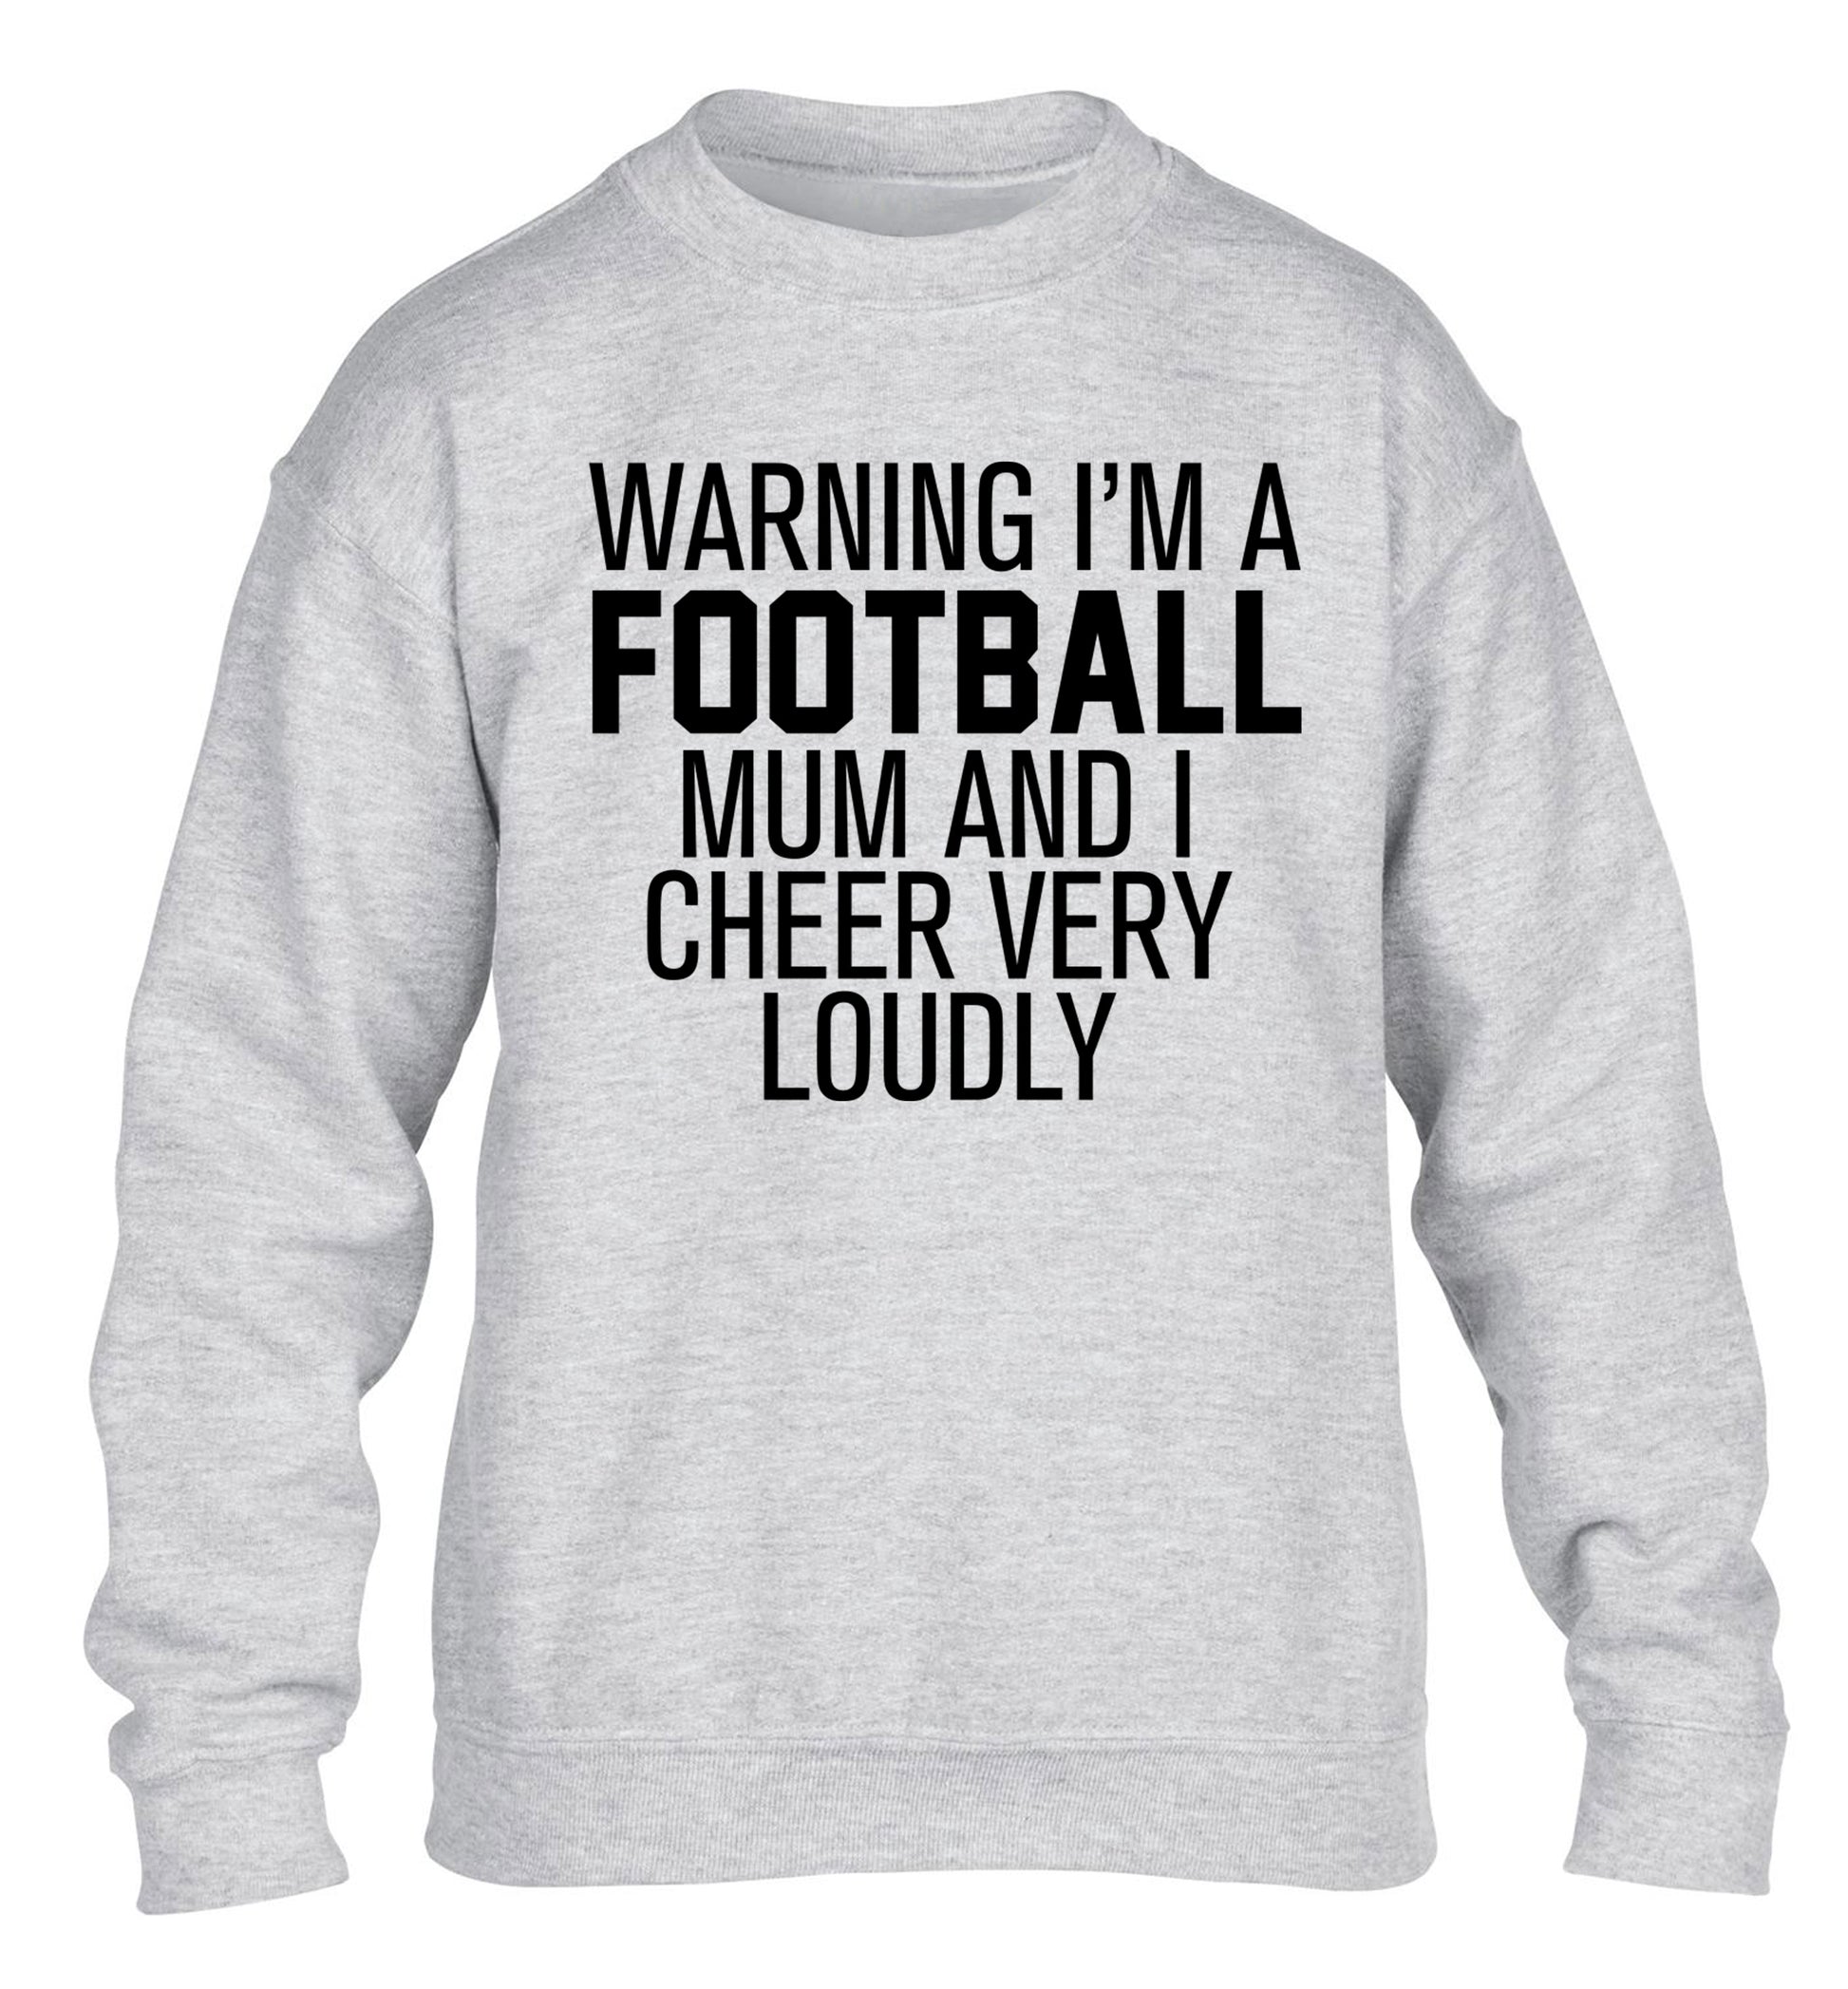 Warning I'm a football mum and I cheer very loudly children's grey sweater 12-14 Years